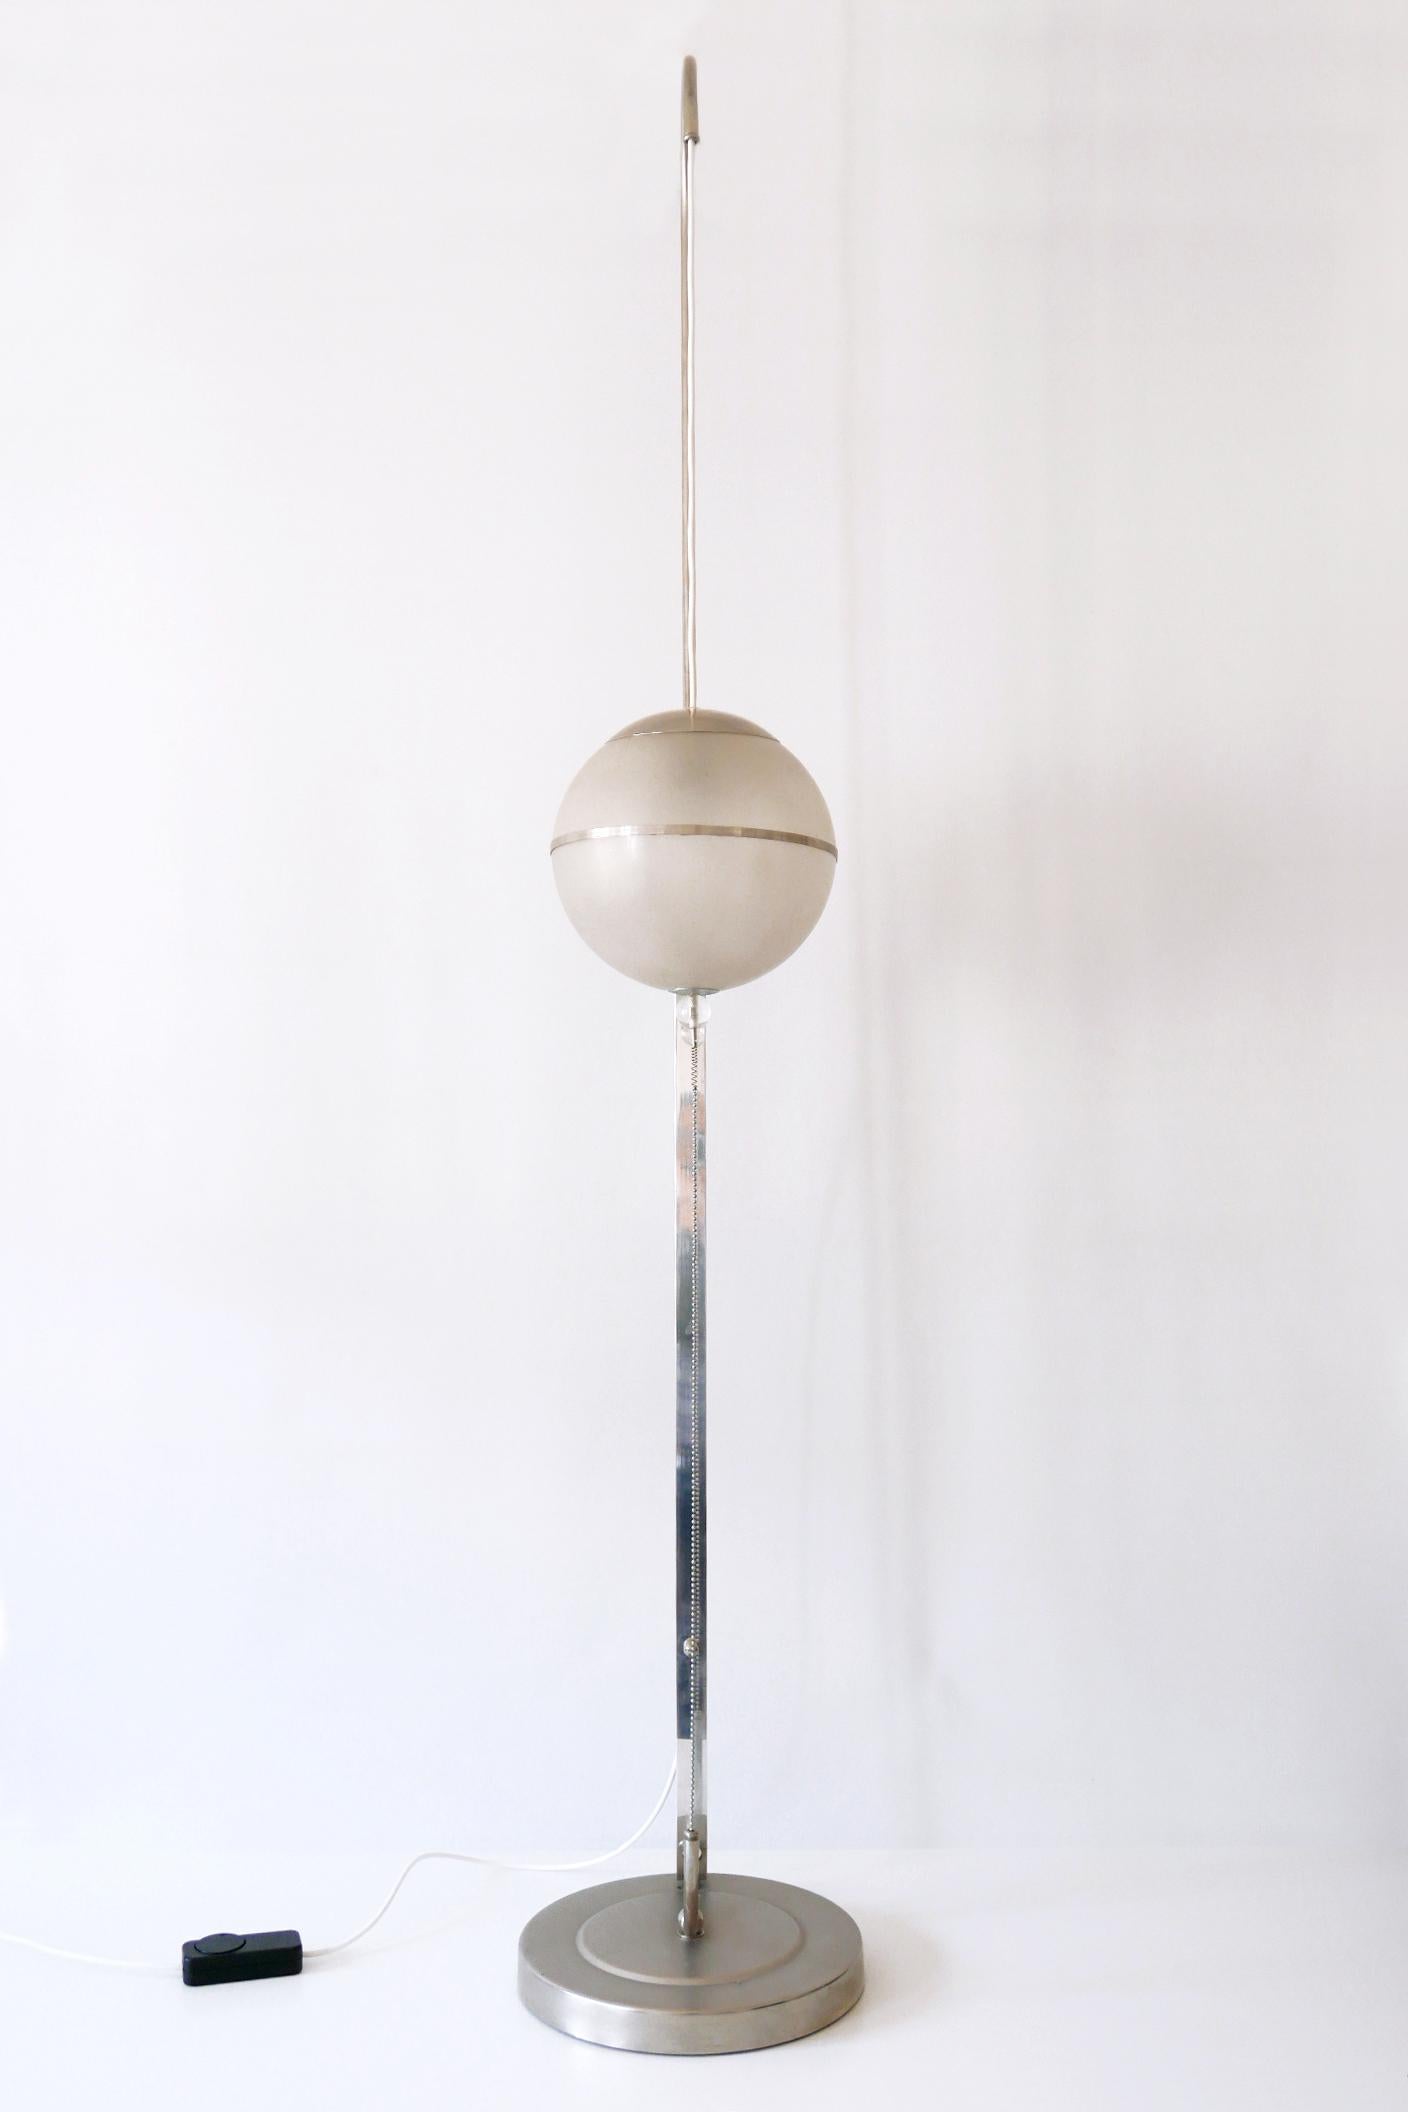 Bauhaus Floor Lamp by Karl Trabert for Schanzenbach & Co 1930s Germany For Sale 1